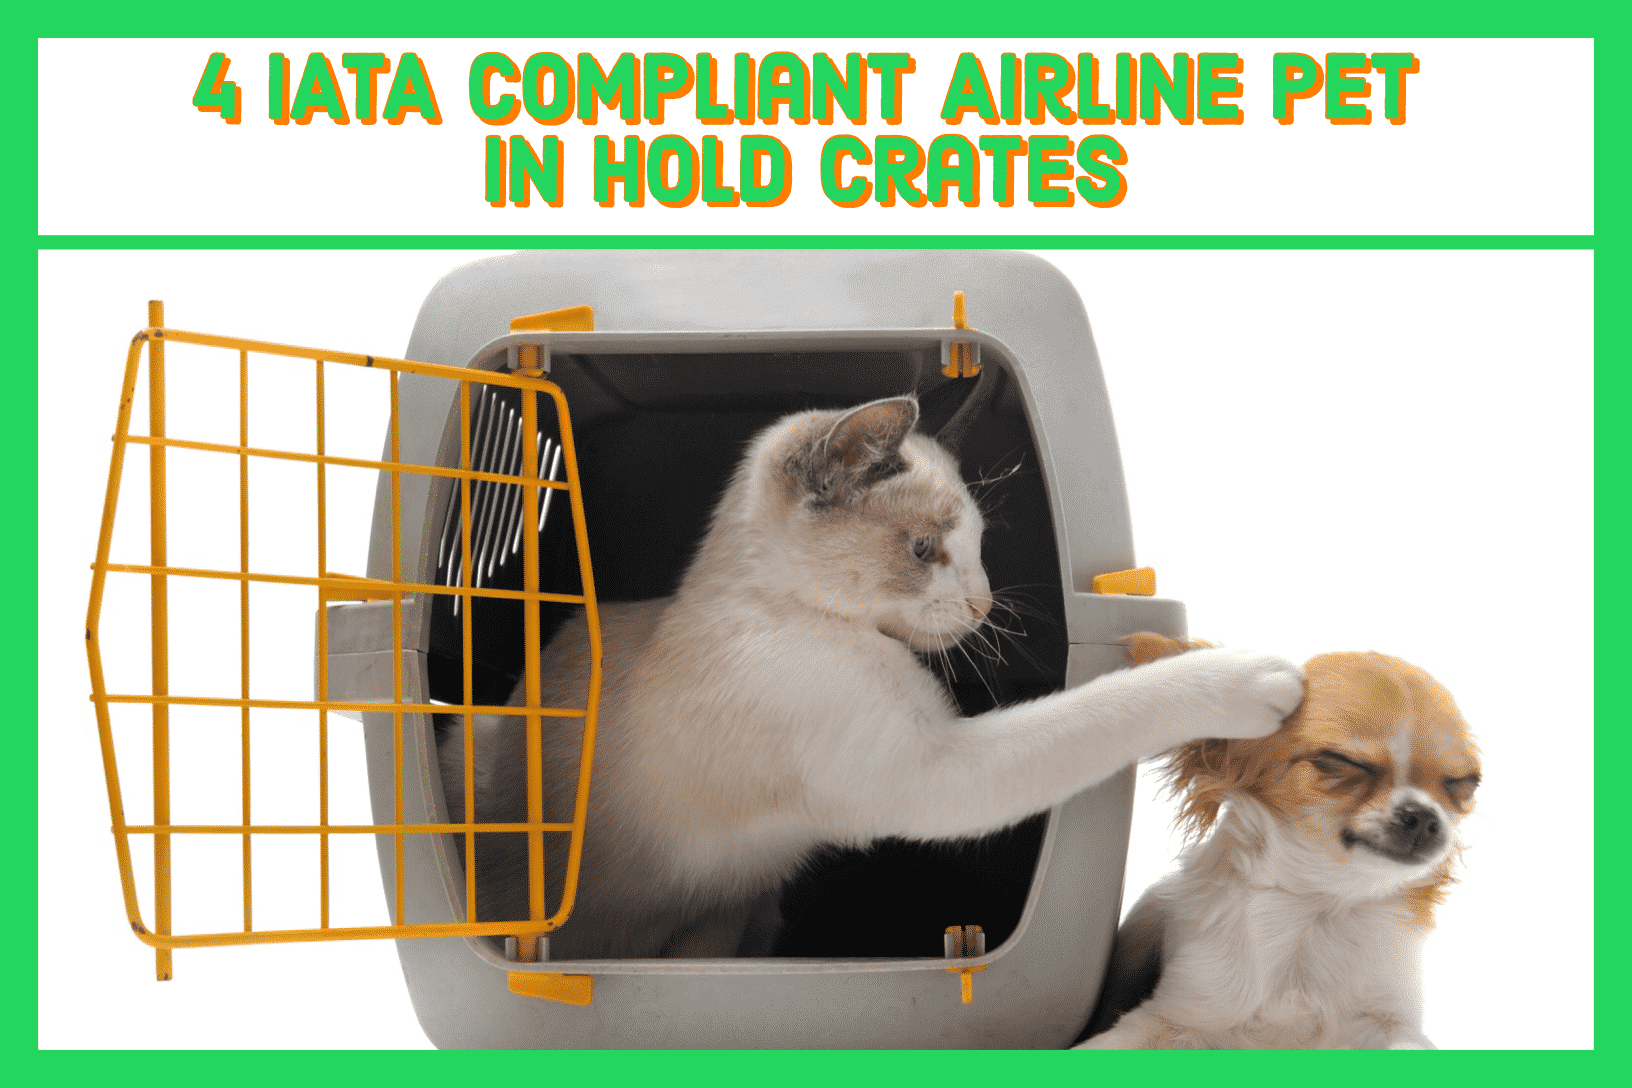 IATA compliant airline pet in hold crates cargo checked baggage cats and dogs